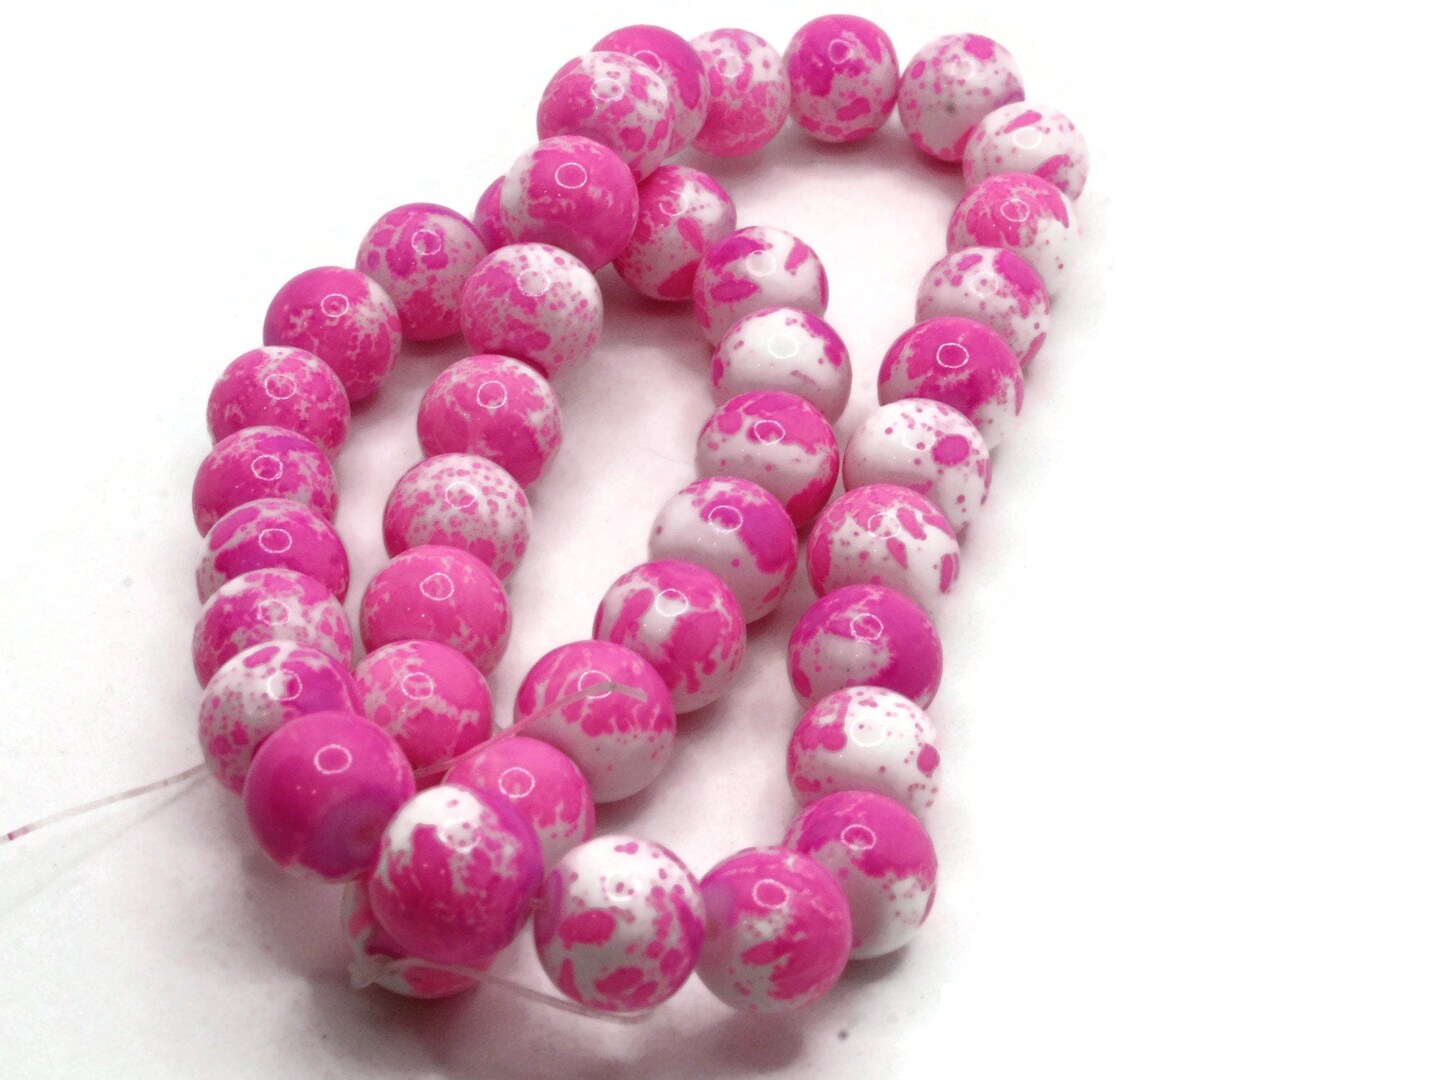 40 10mm White with Purple Round Glass Splatter Paint Beads by Smileyboy Beads | Michaels